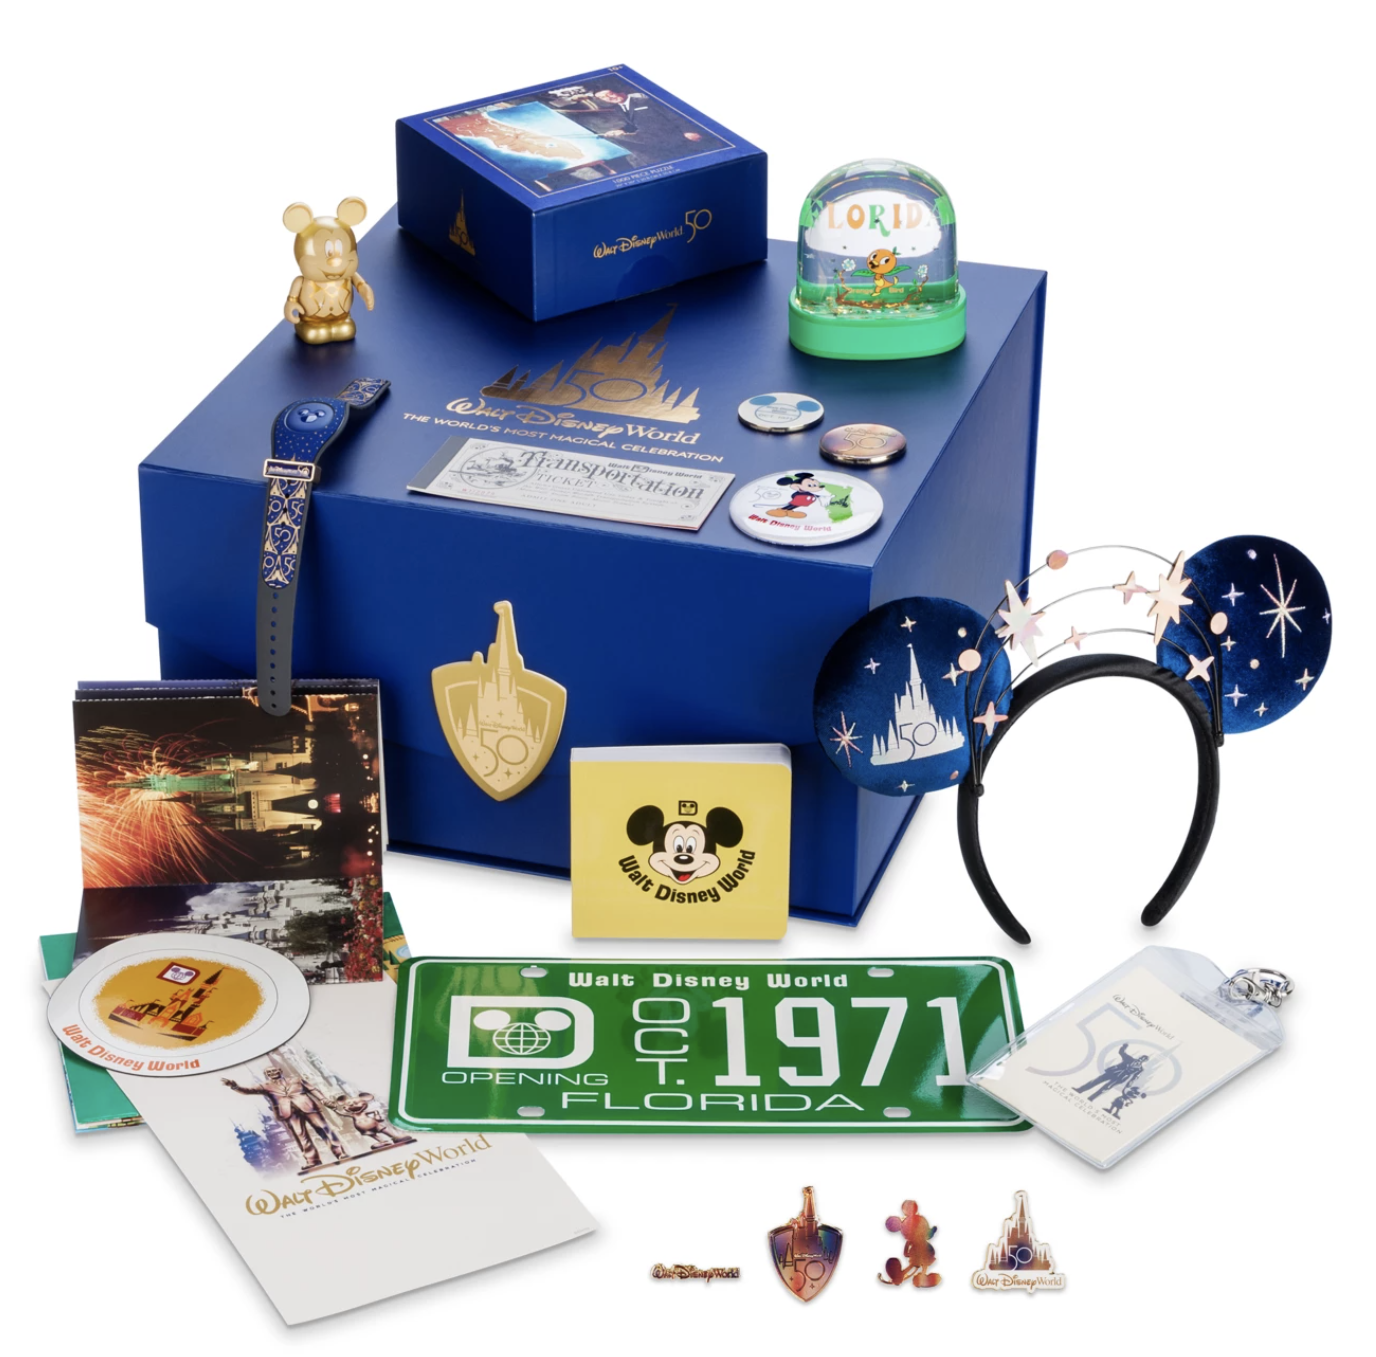 https://allears.net/wp-content/uploads/2021/10/2021-shop-disney-disney-world-50th-anniversary-box-limited-release-pre-order0.png